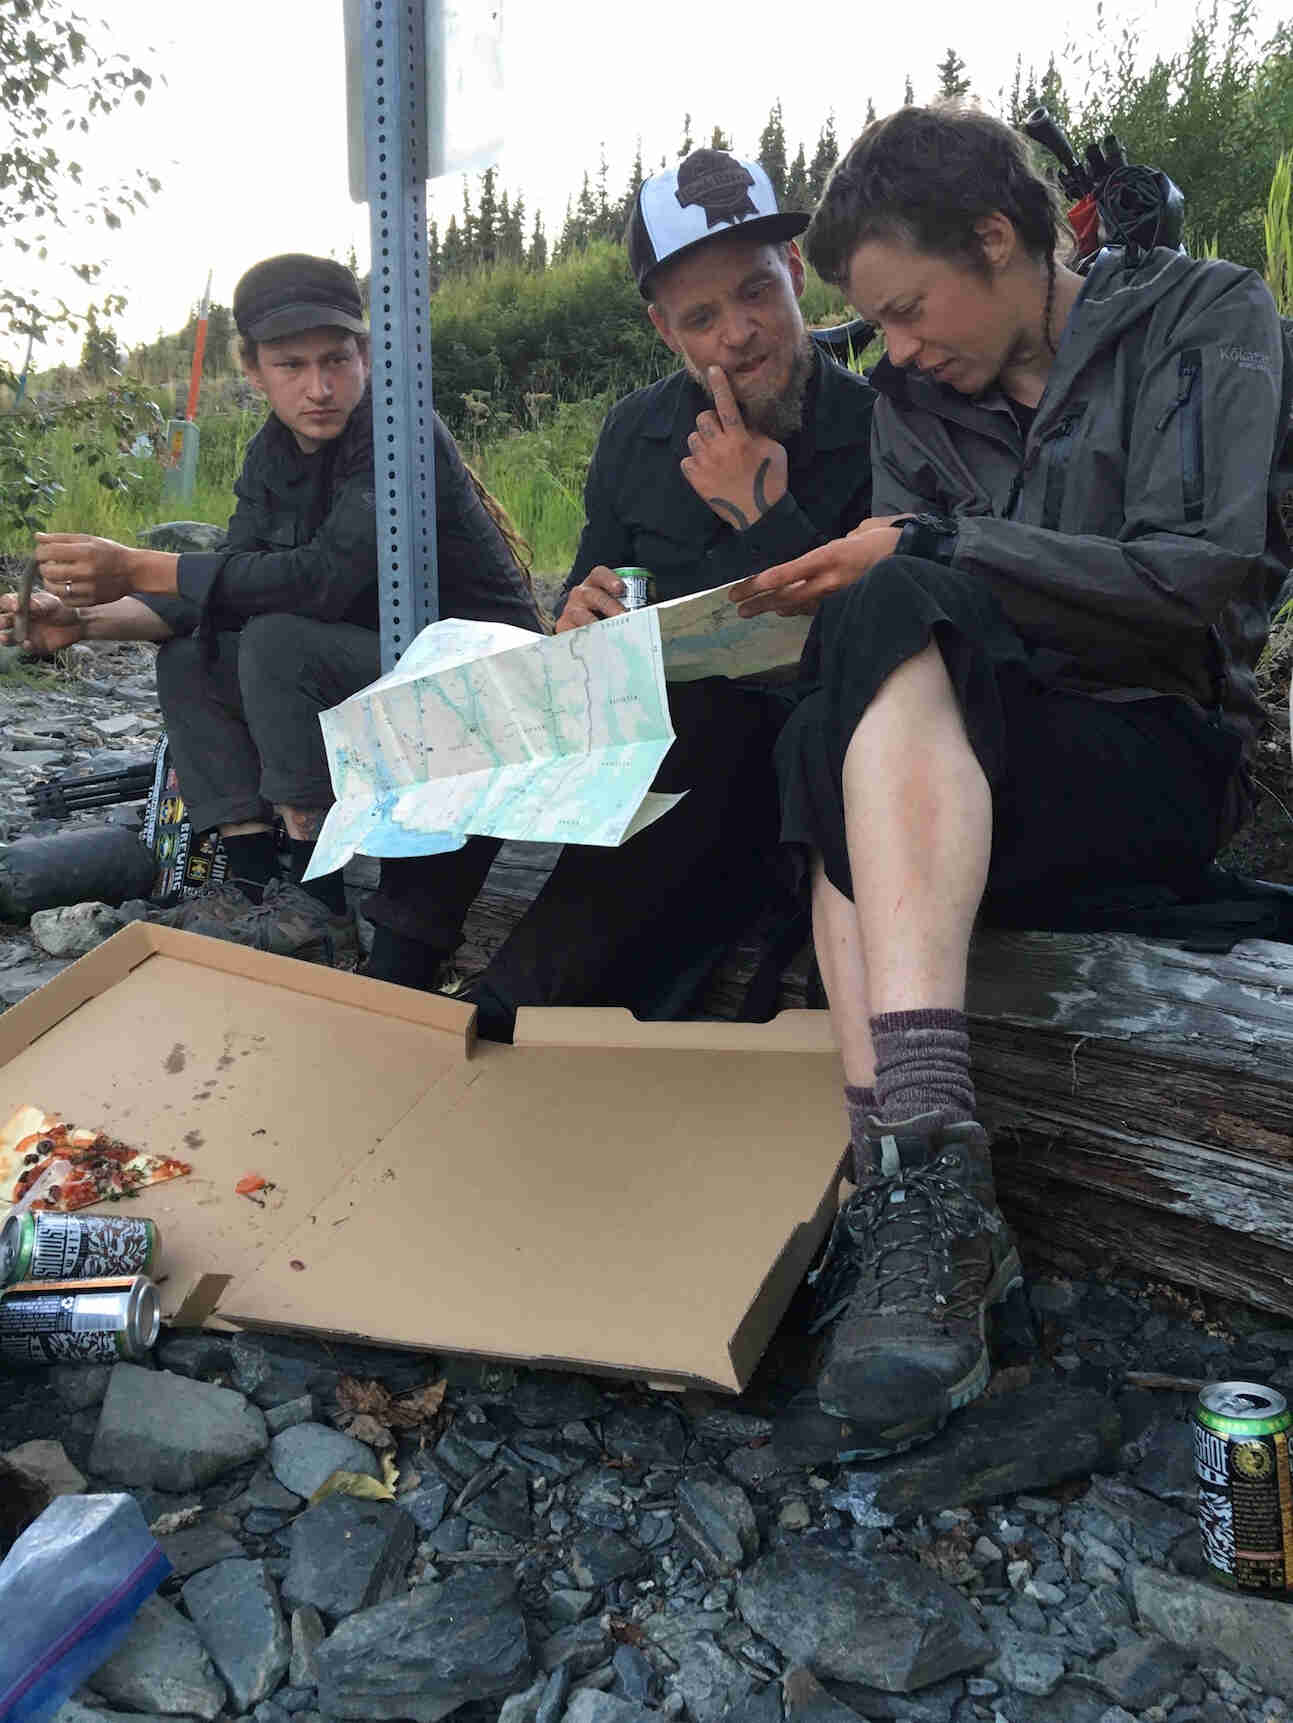 Front view of 3 people sitting on a log, looking at a map, with a pizza box sitting on the ground in front of them